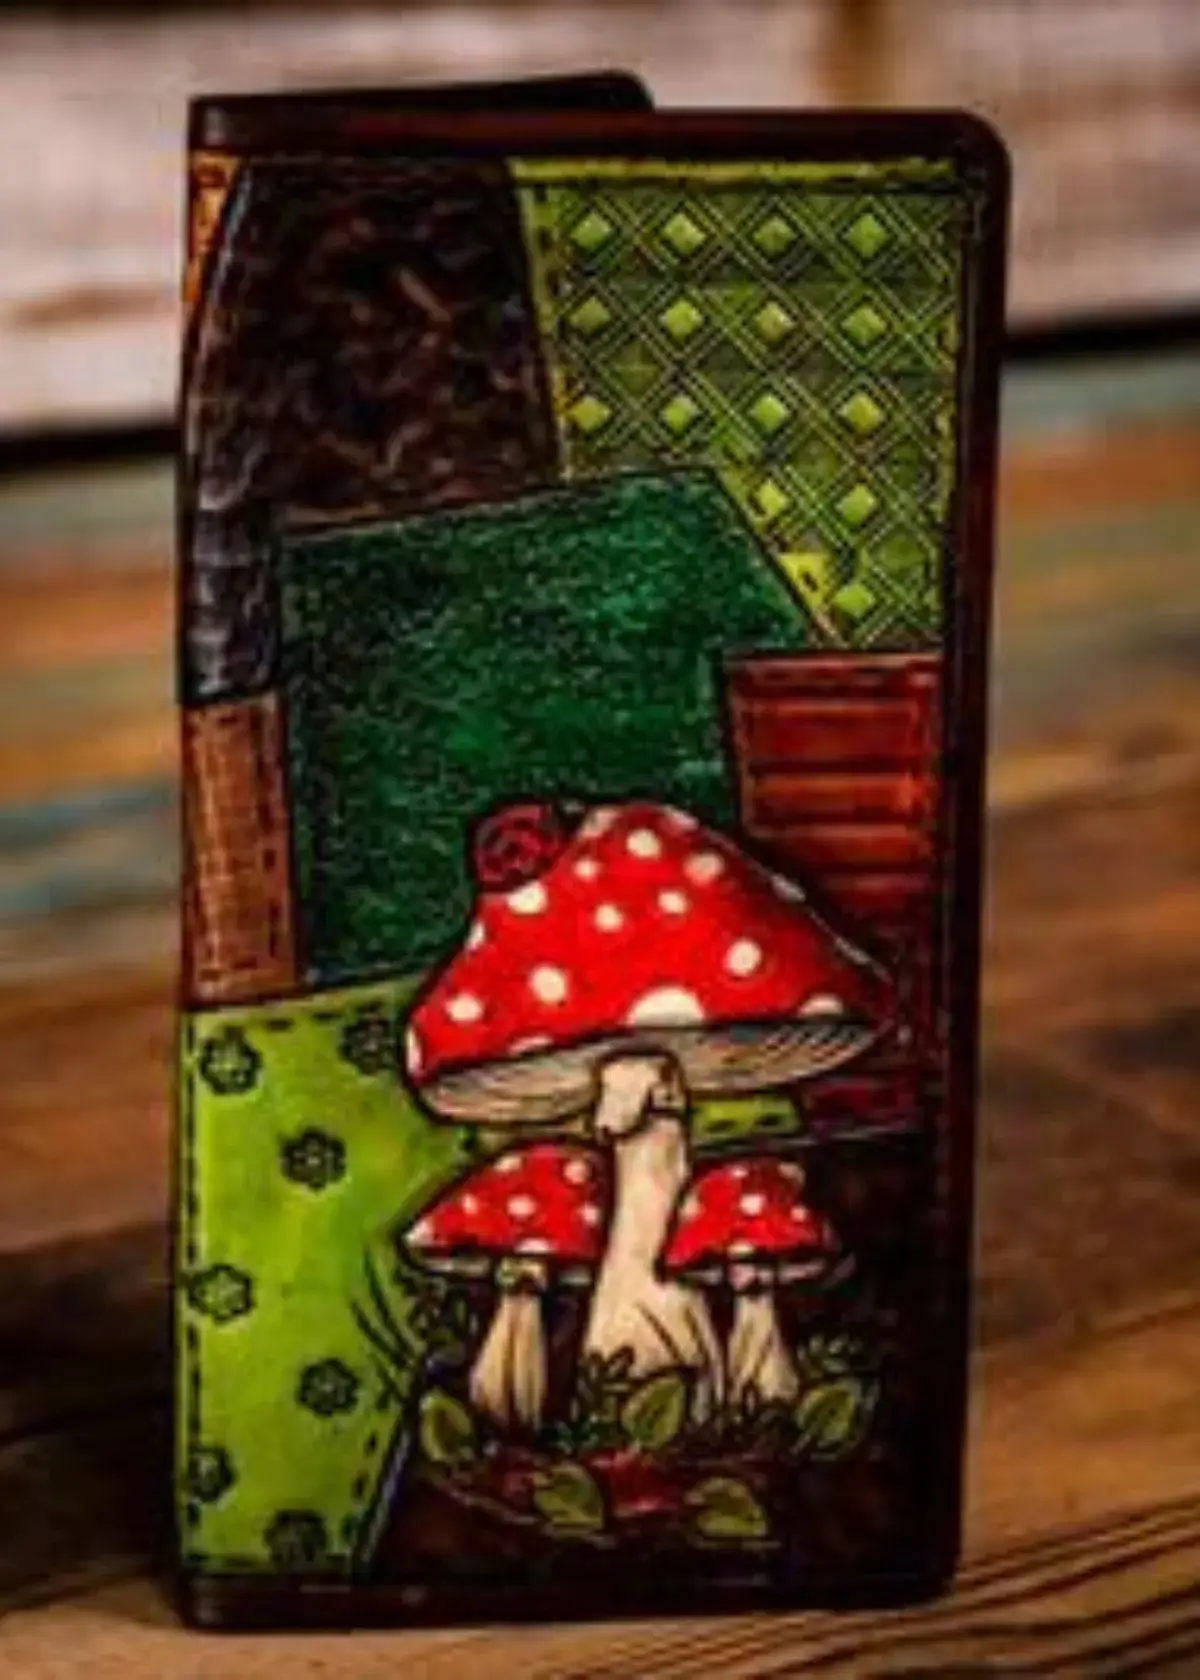 How durable are Mushroom Wallets compared to traditional leather wallets?